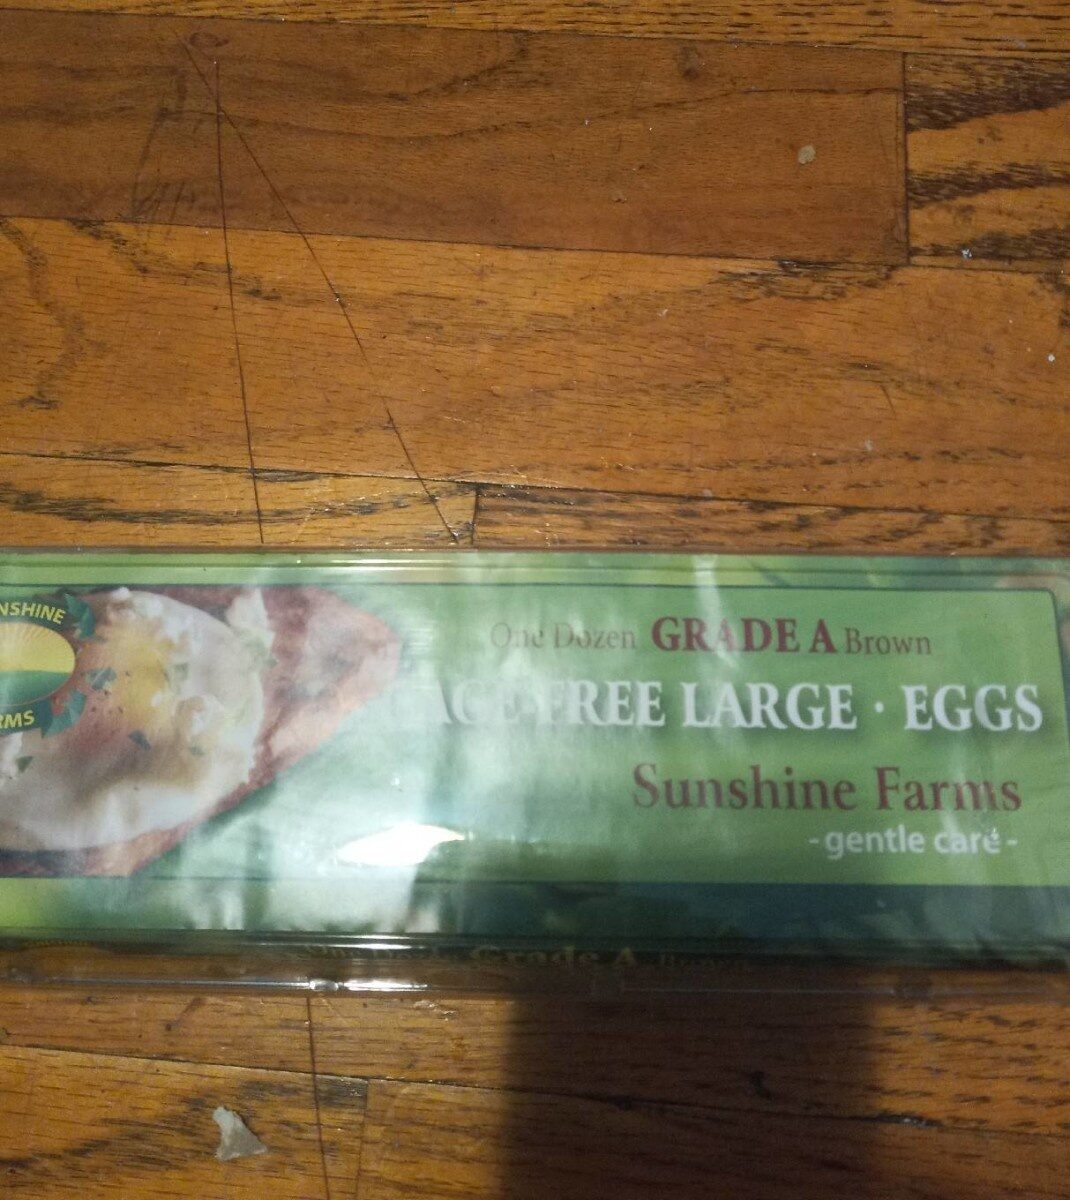 Cage-free large eggs - Product